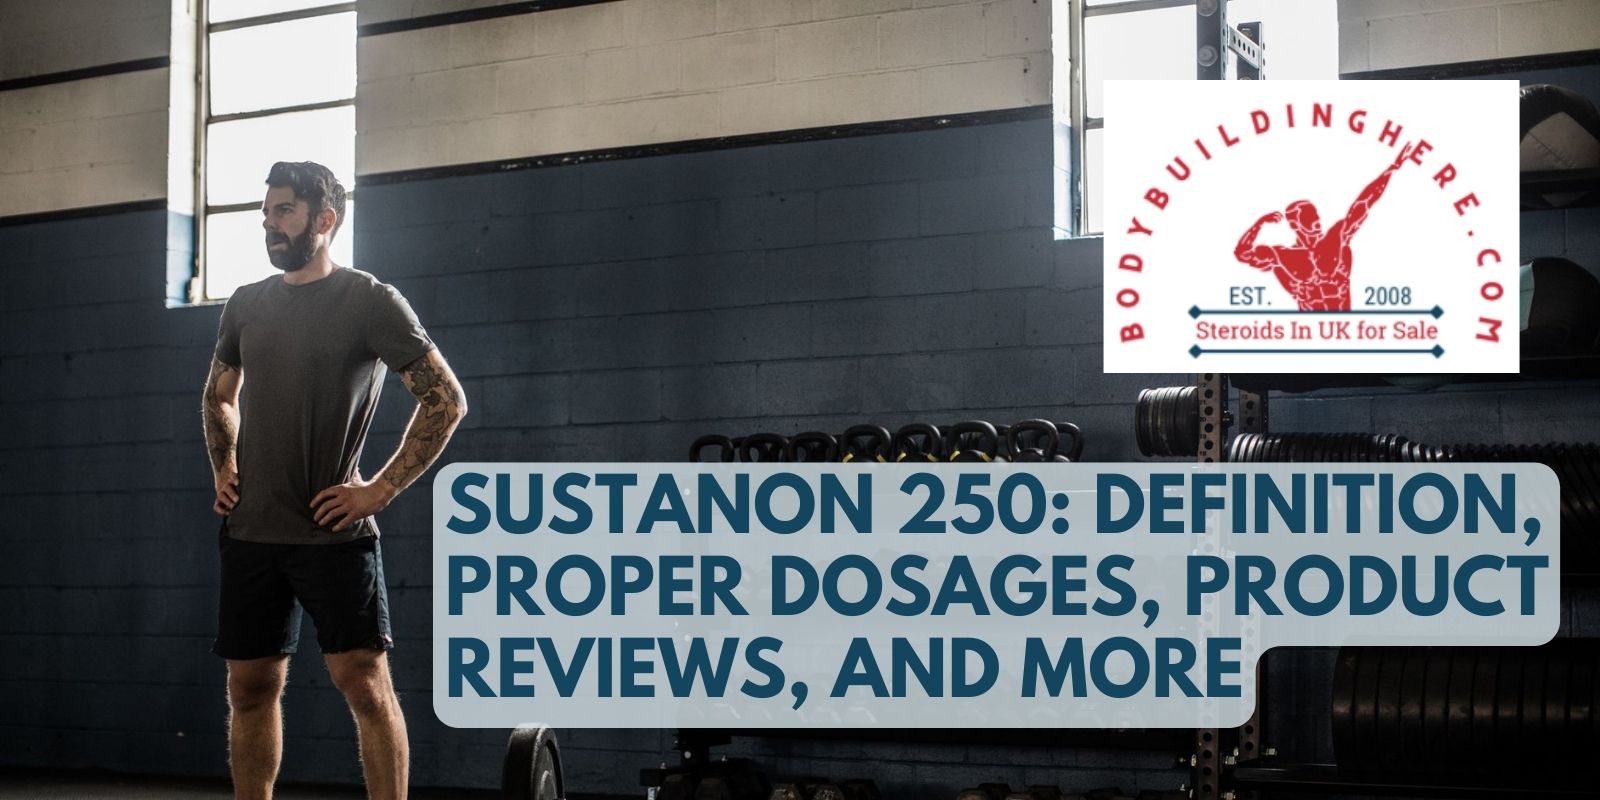 Sustanon 250: Definition, Proper Dosages, Product Reviews, and More